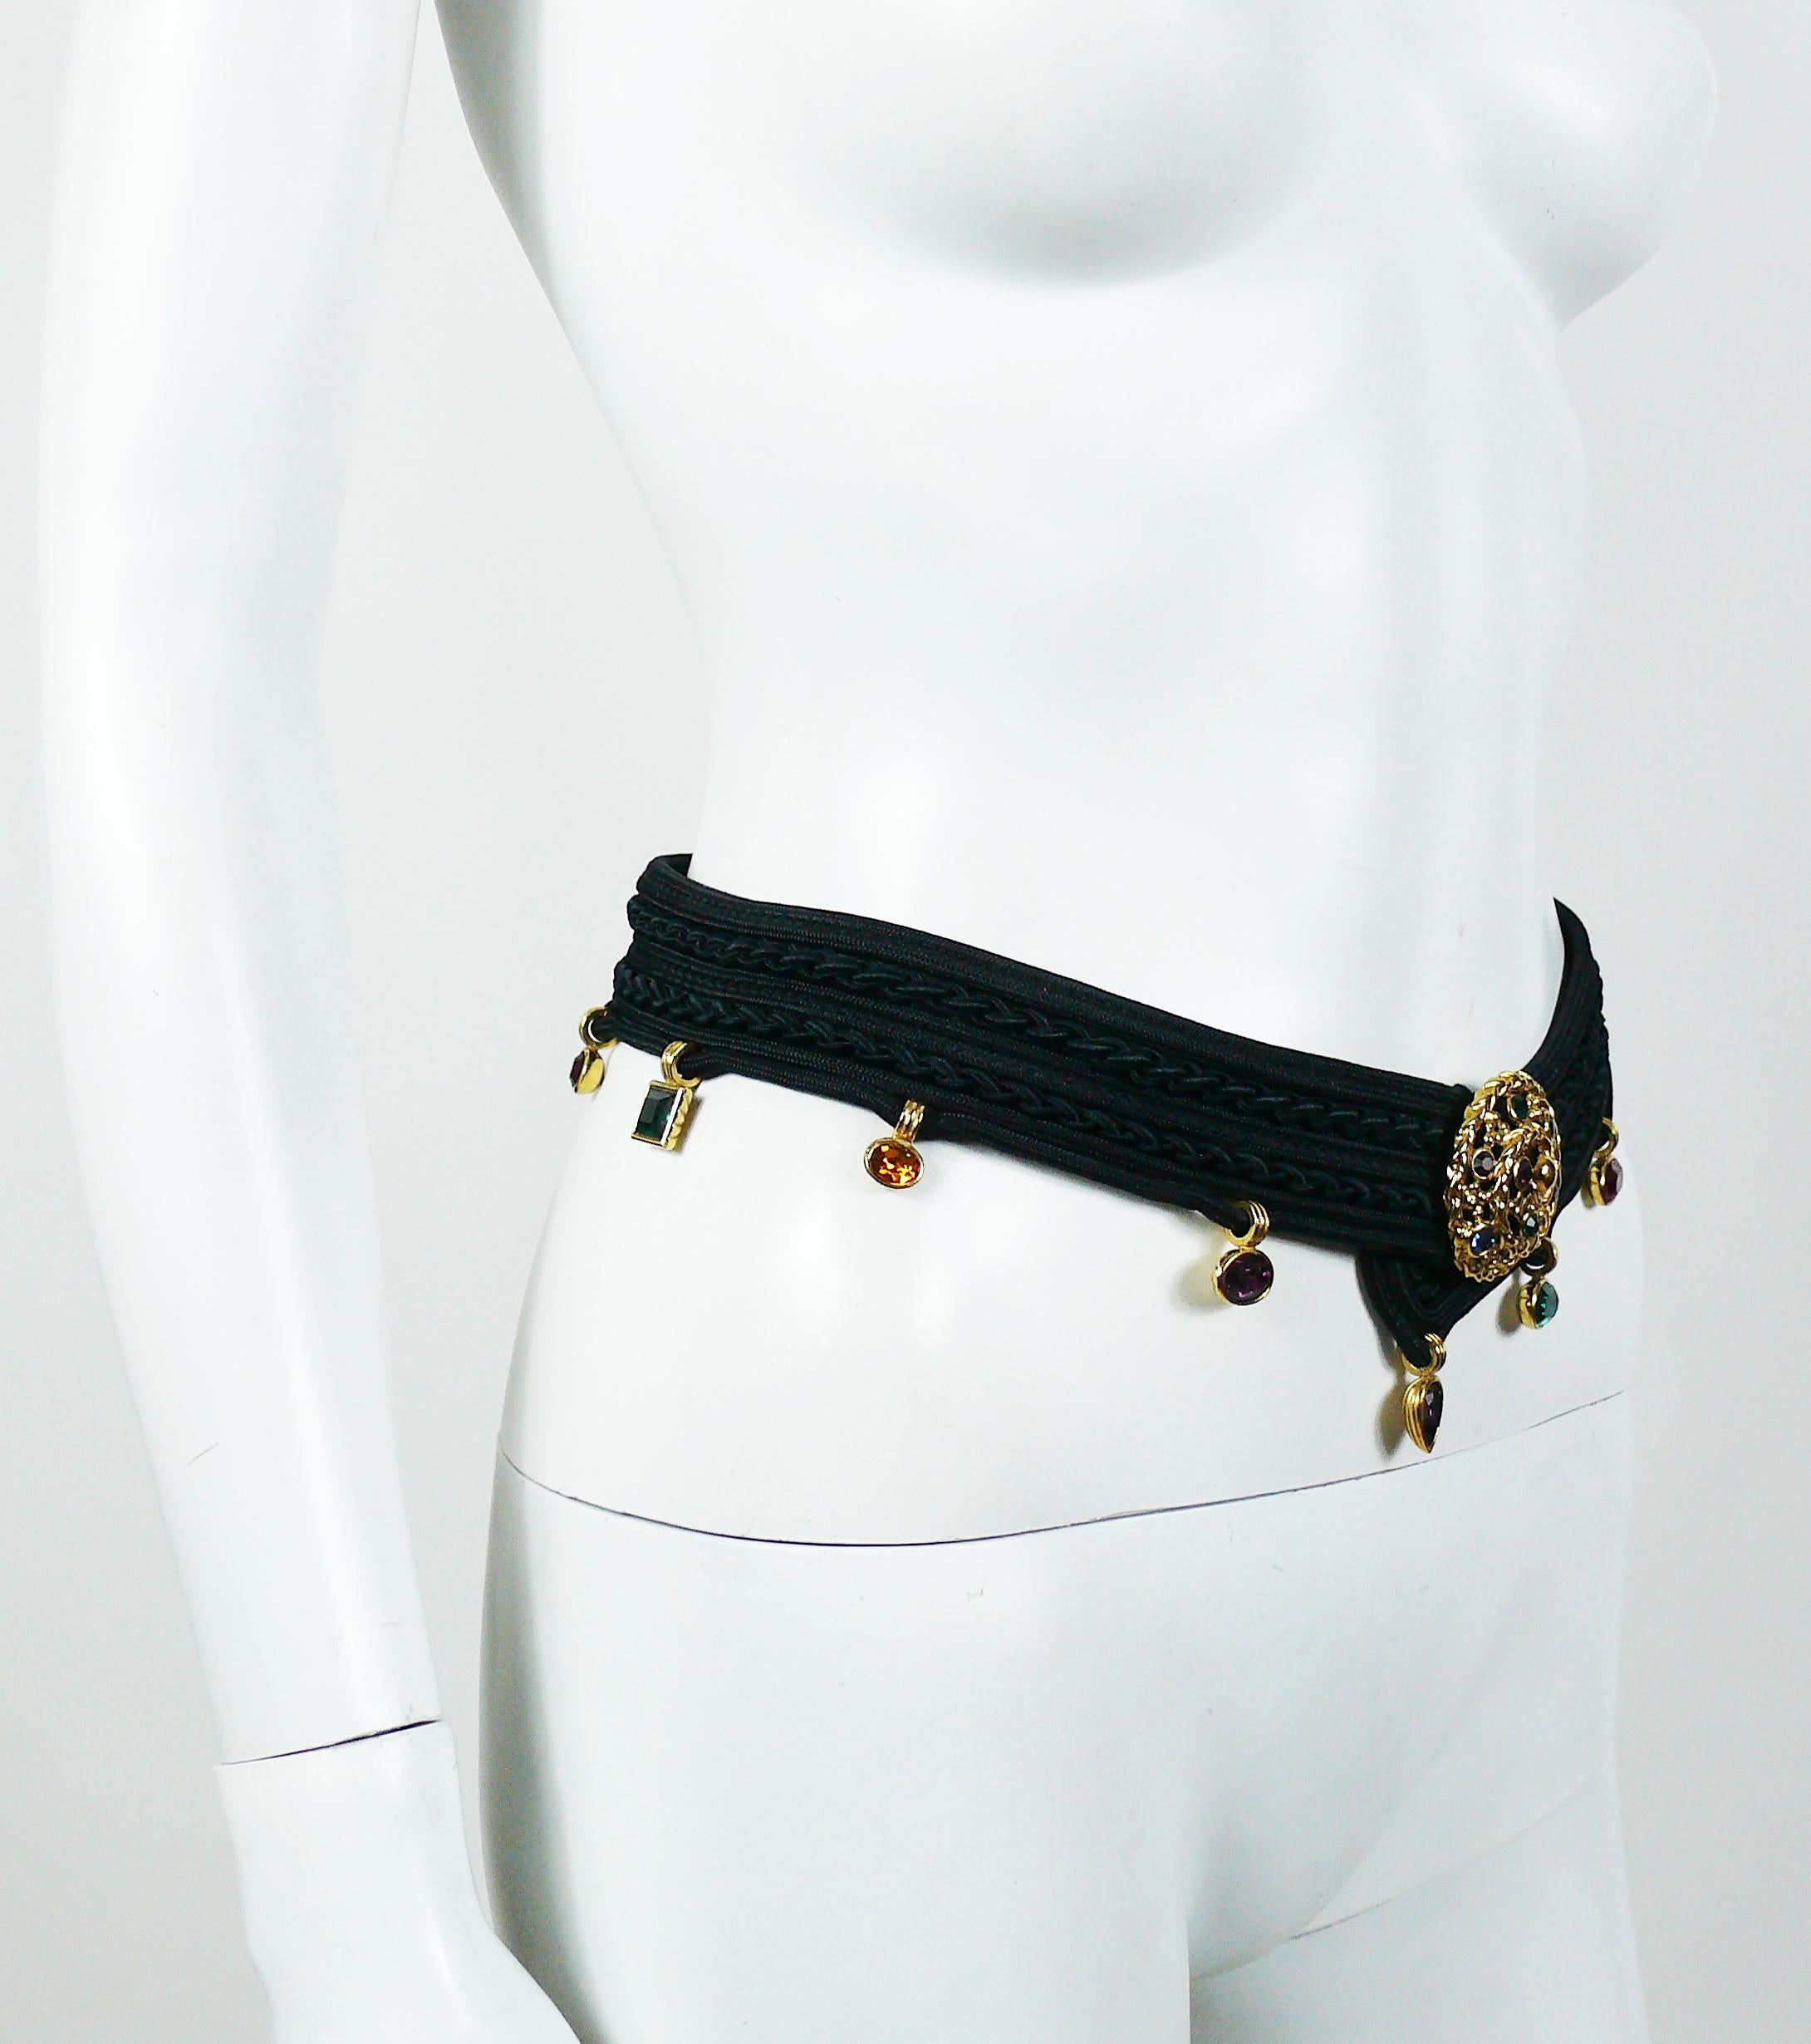 YVES SAINT LAURENT Rive Gauche vintage black passementerie belt featuring multicolored crystal embellishement.

Hook clasp closure.

Marked YVES SAINT LAURENT Rive Gauche.

Indicative measurements : length approx. 70 cm (27.56 inches) / strap width